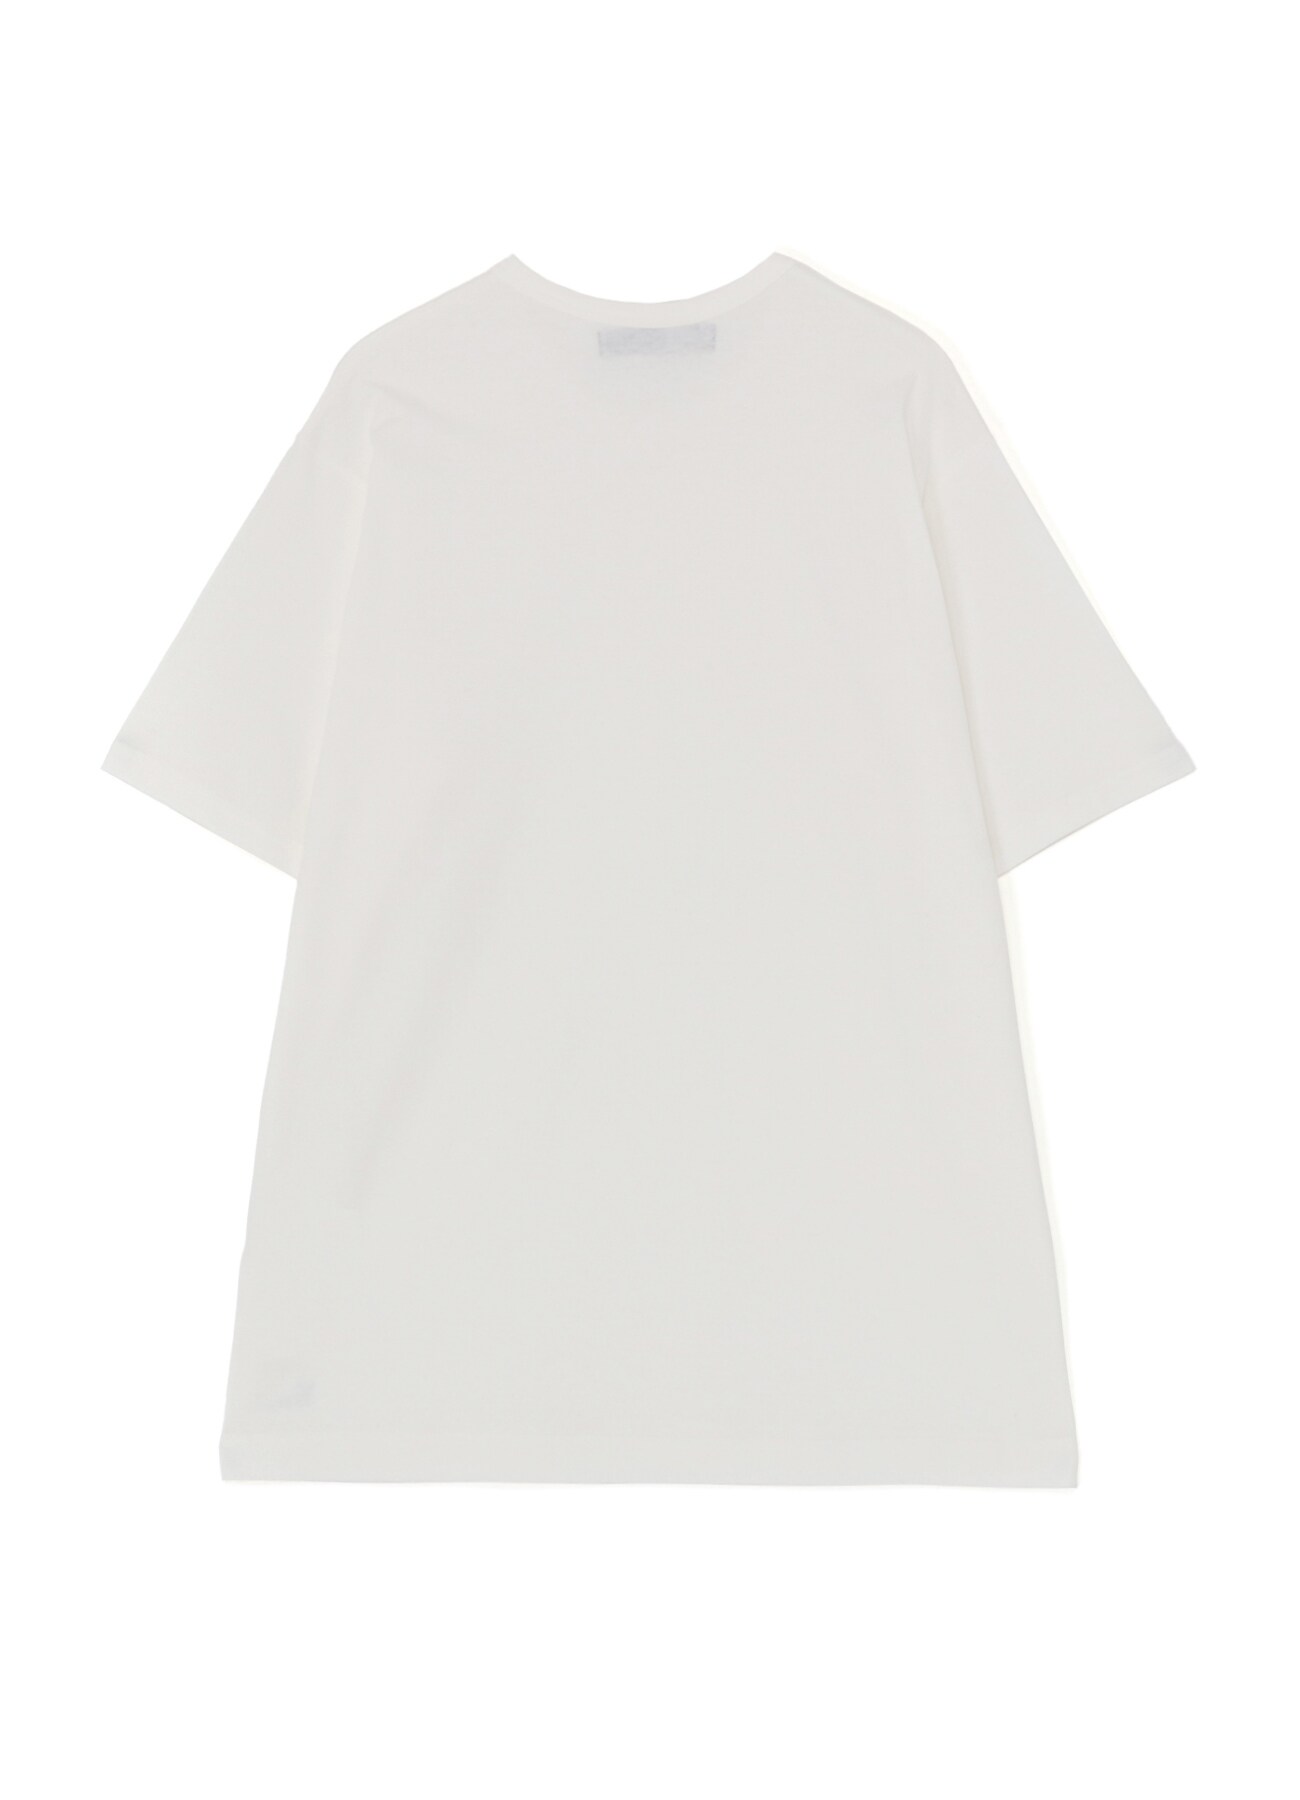 Y's for men LOGO PRINT SHORT SLEEVE T-SHIRTS(FREE SIZE Off White 